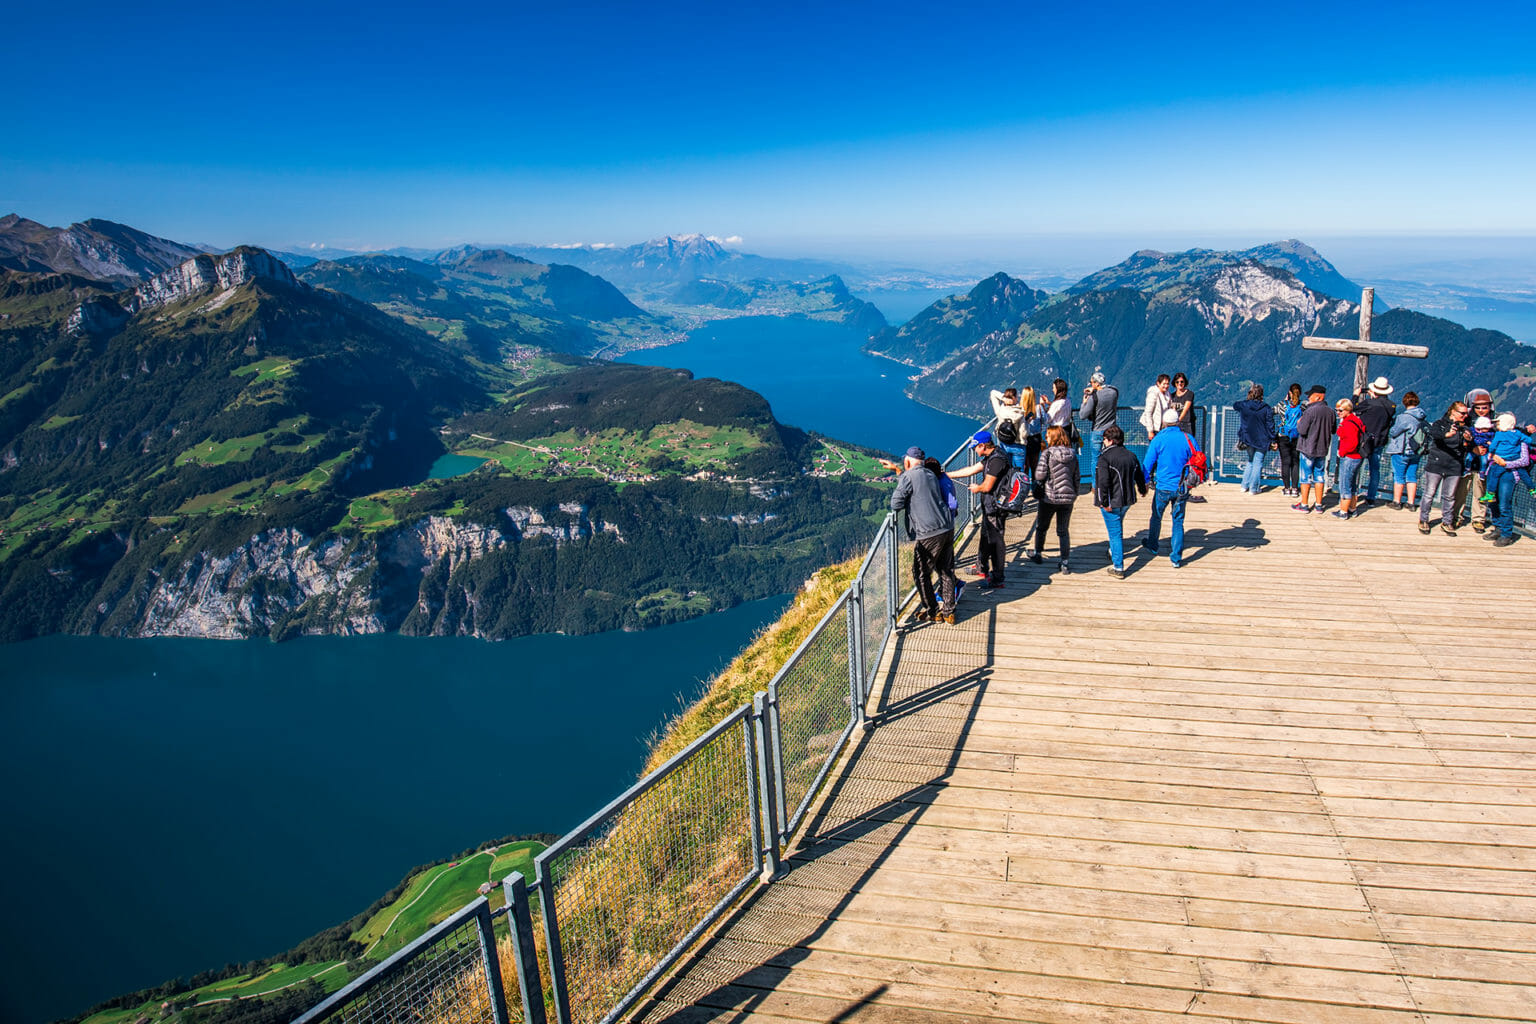 Fantastic view to Lake Lucerne with Rigi and Pilatus mountains,